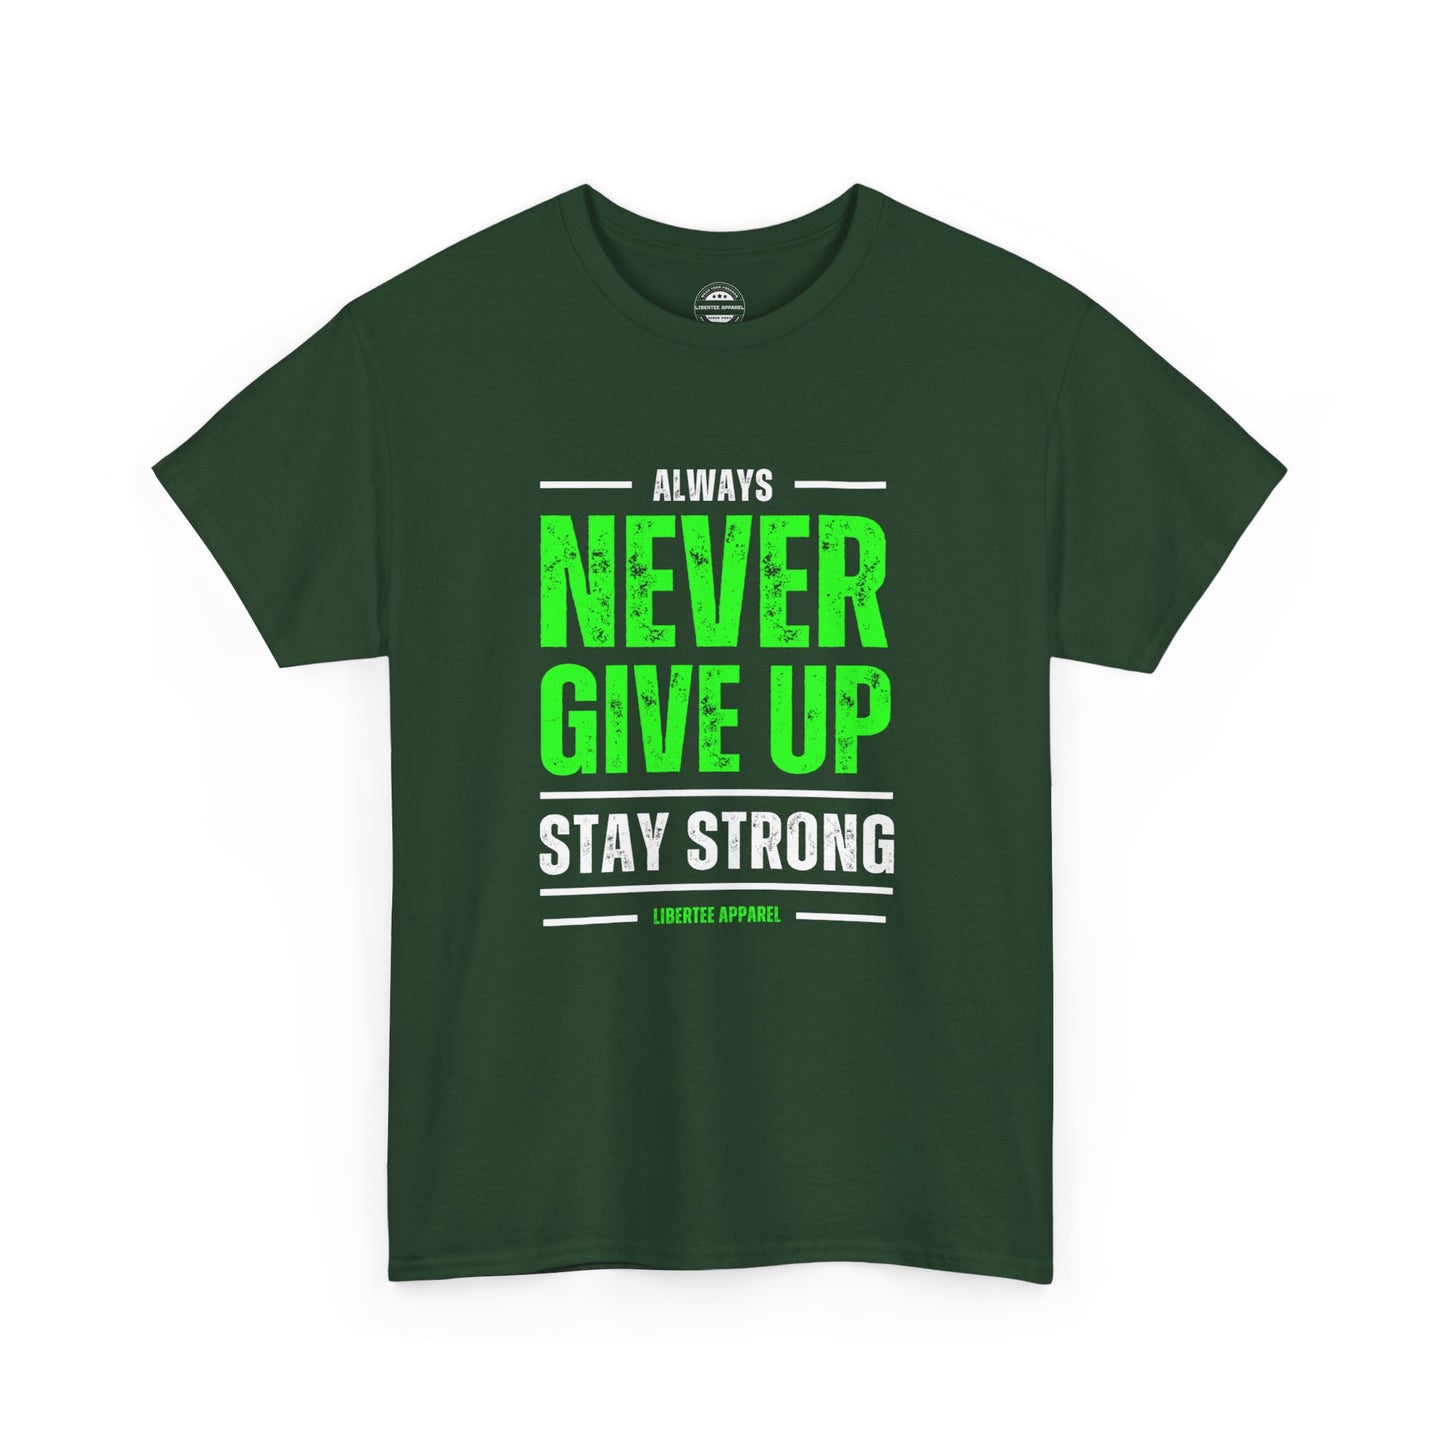 Never Give Up! Stay Stong!